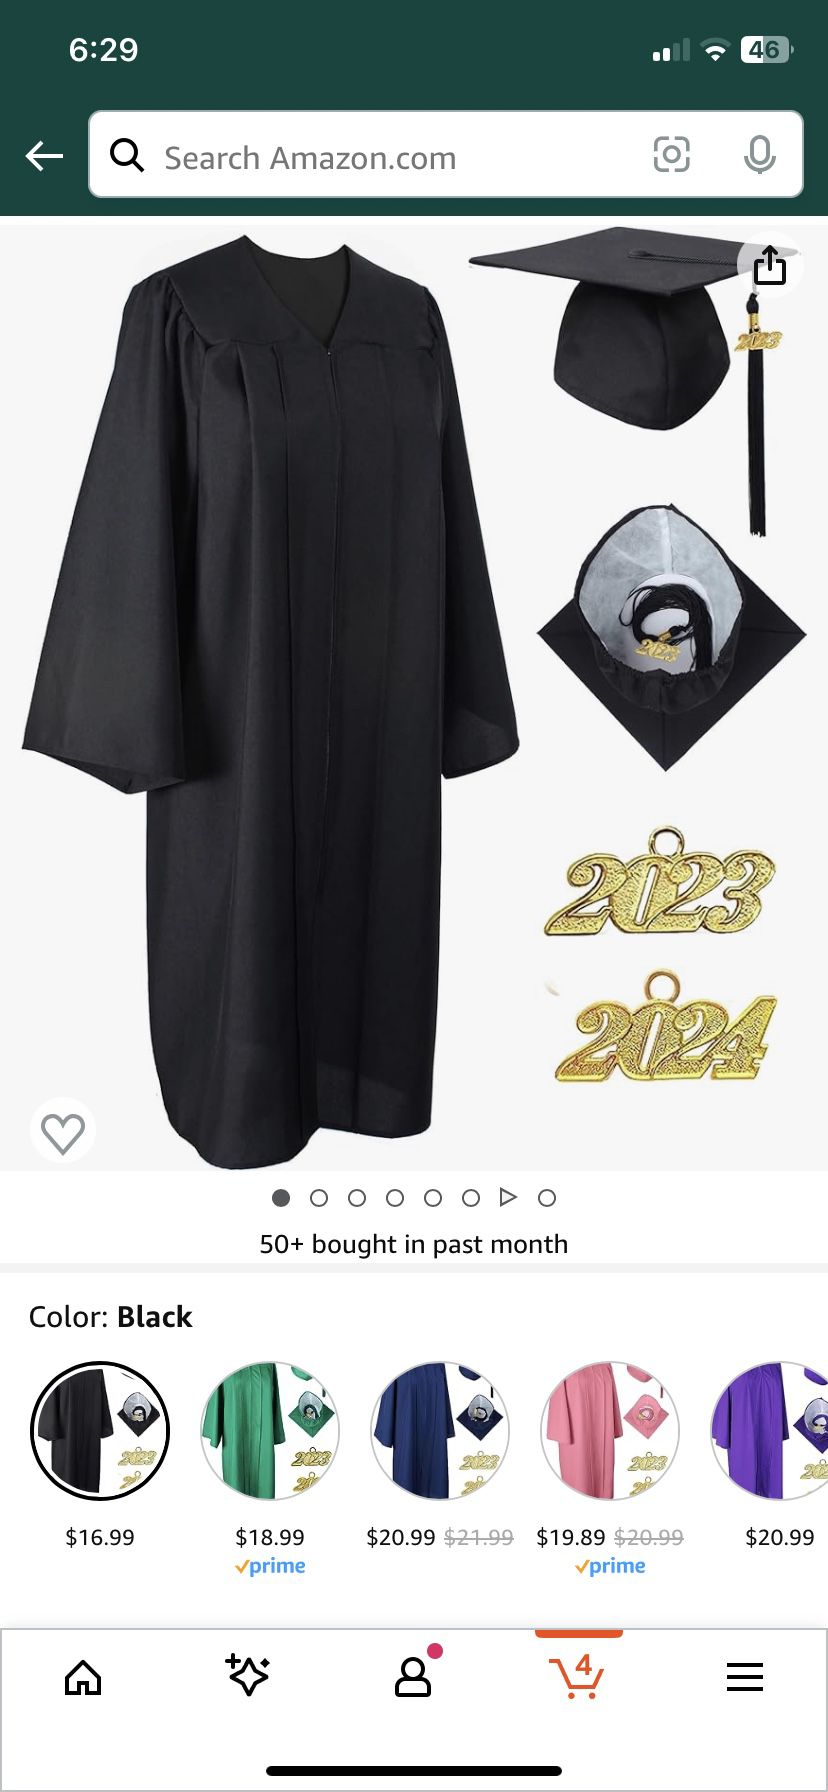 Graduation Gown, Hat, And Stole SJSU